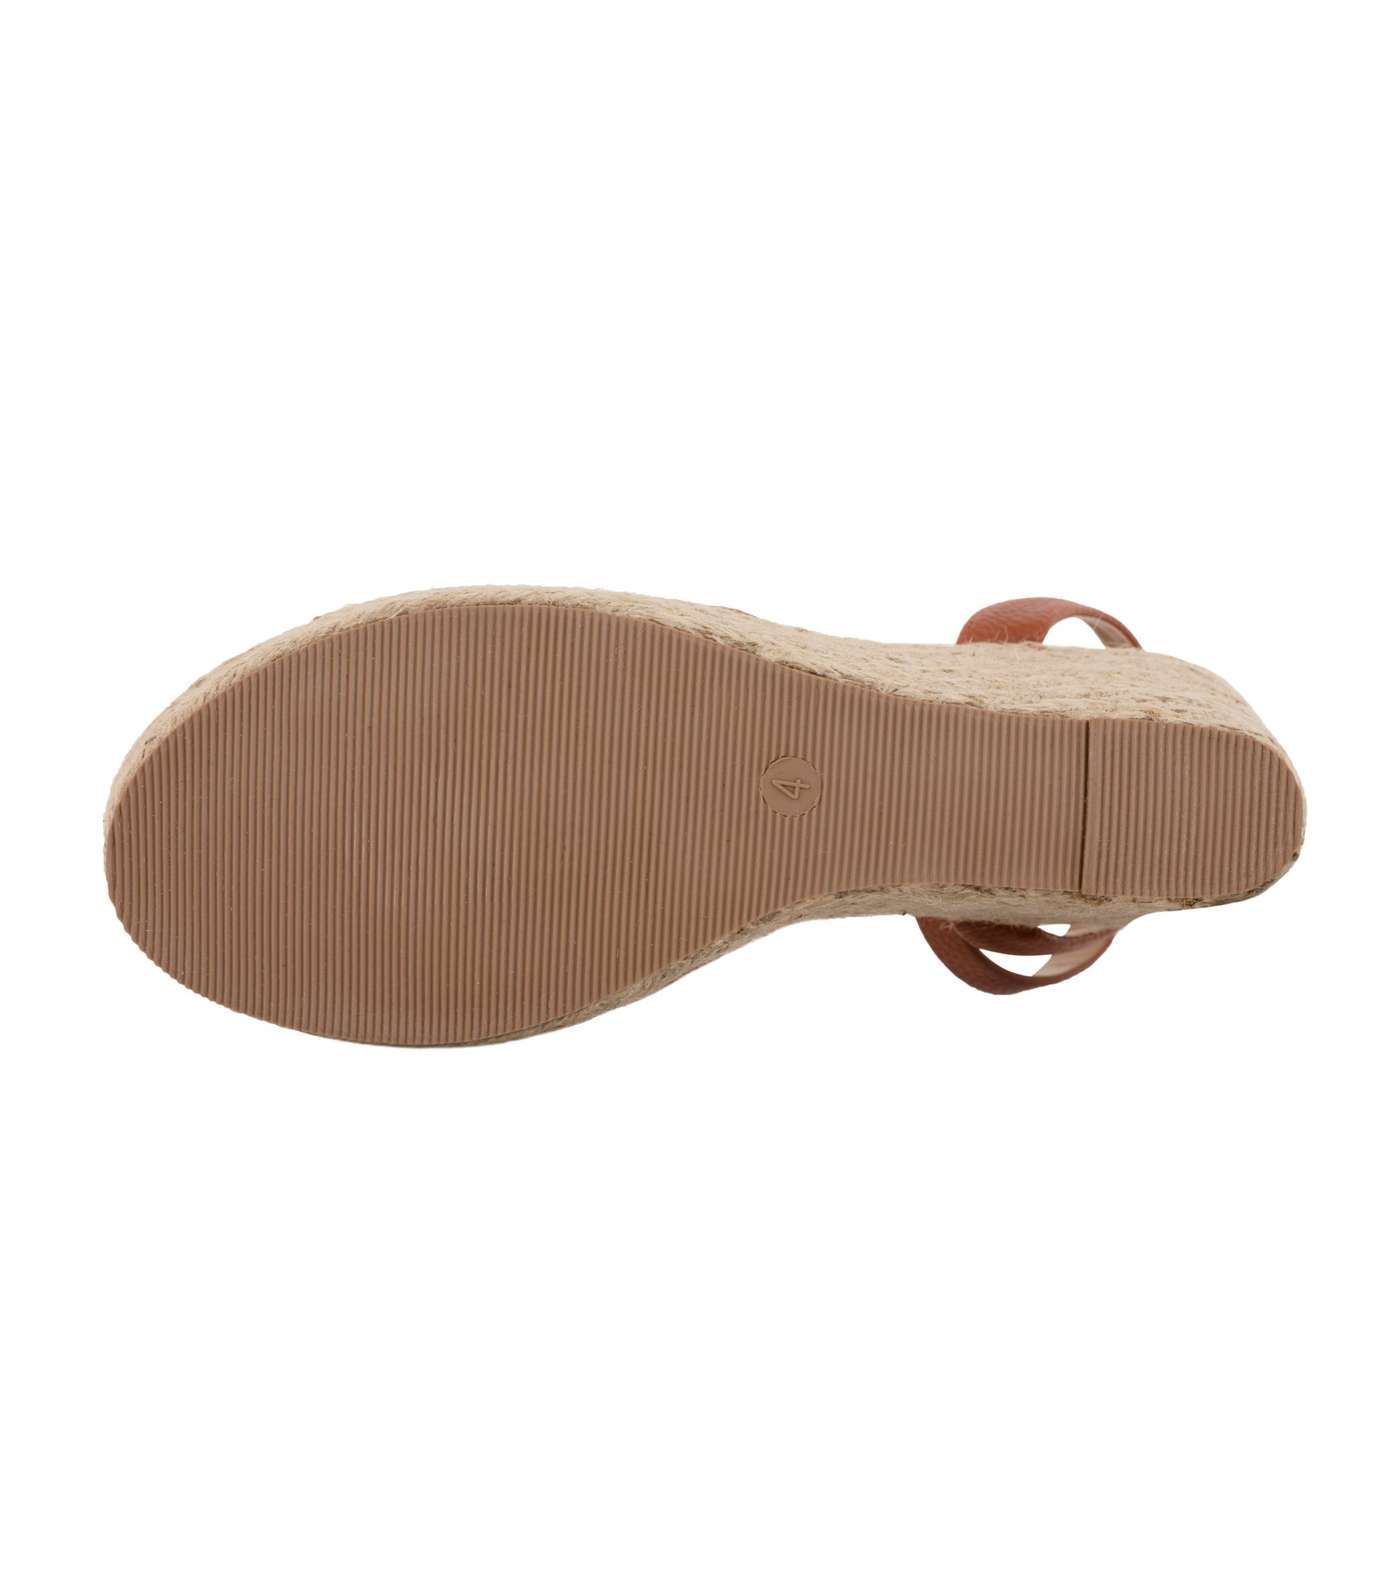 South Beach Tan Leather-Look Espadrille Wedge Sandals Image 5